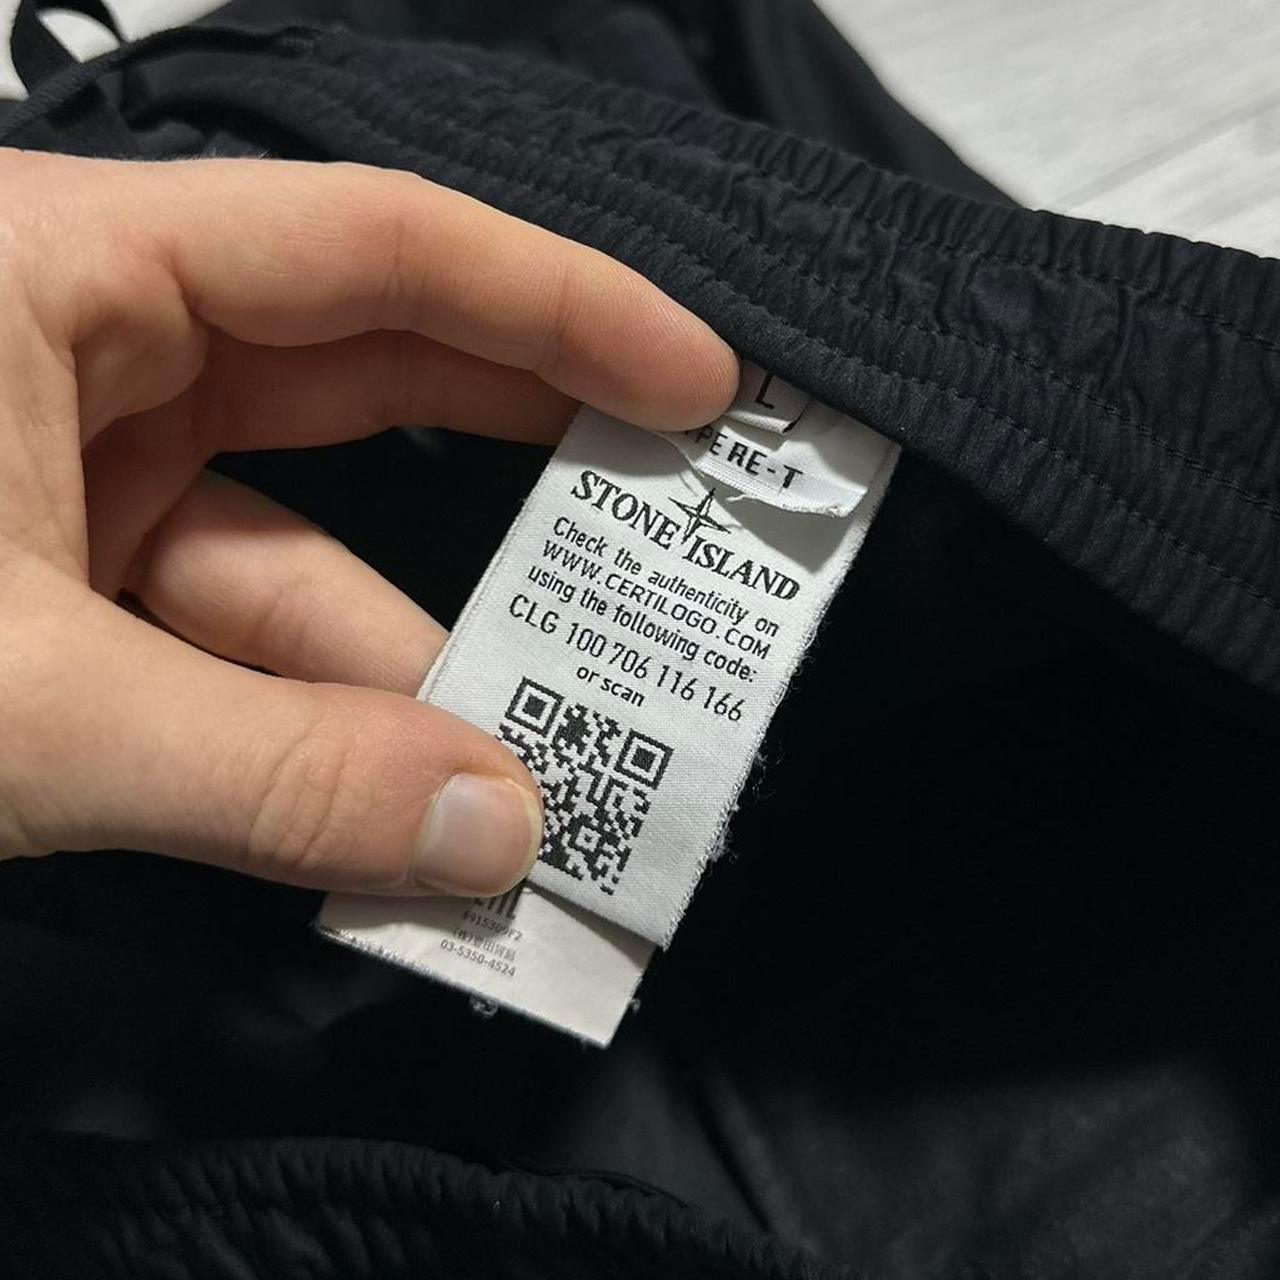 Stone Island Ghost Cargo Bottoms - Known Source